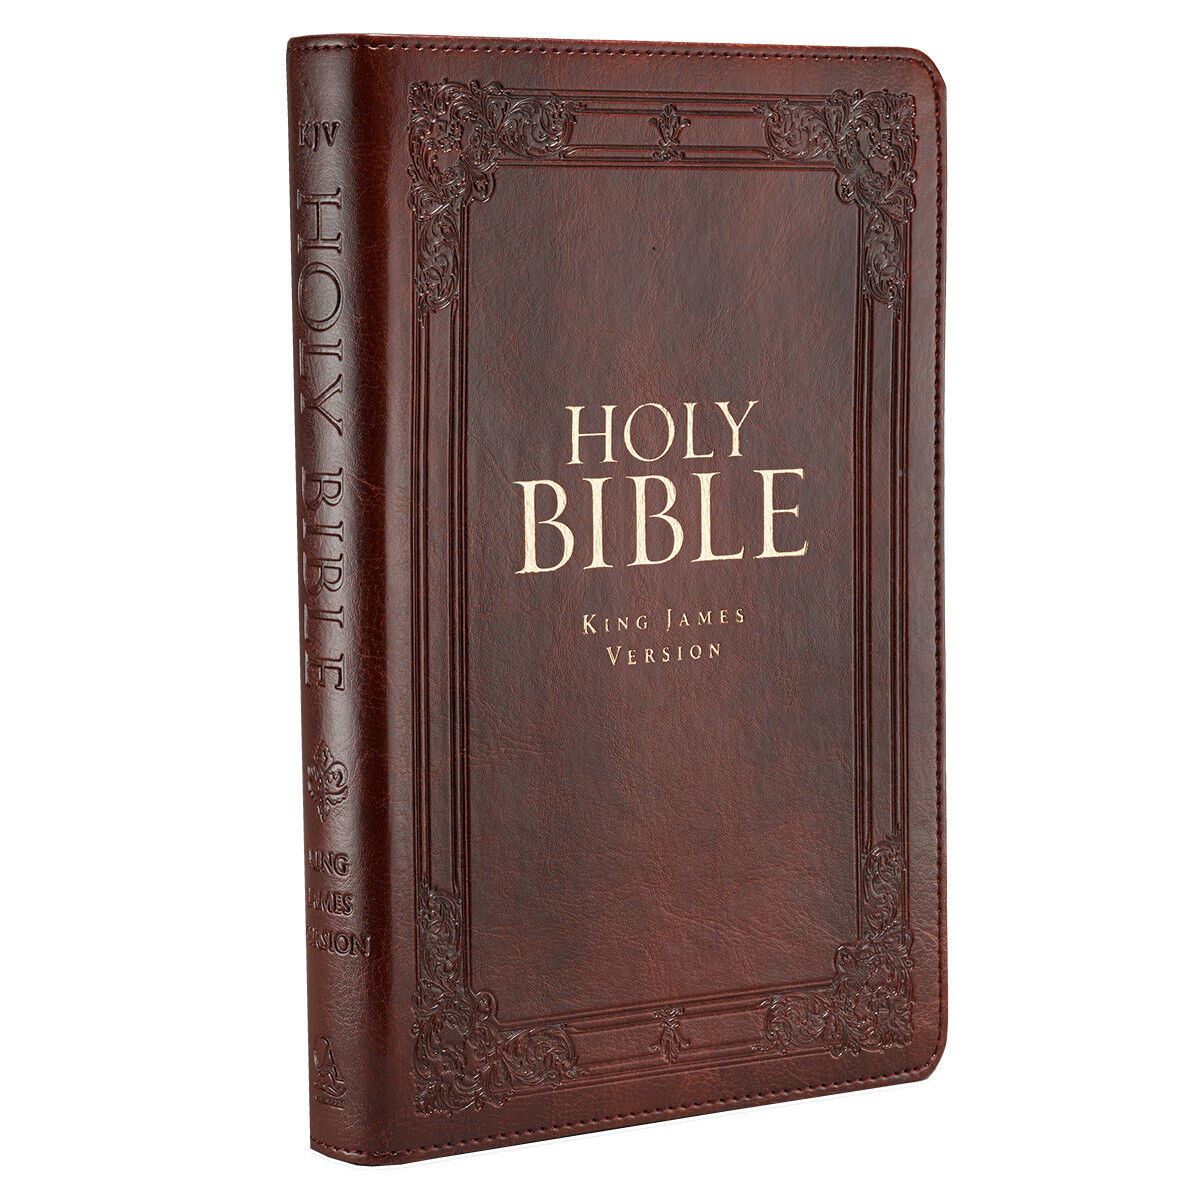  Holy Bible King James Version Thumb Indexed Burgundy Faux Leather Gift Bible Без бренда - фотография #2